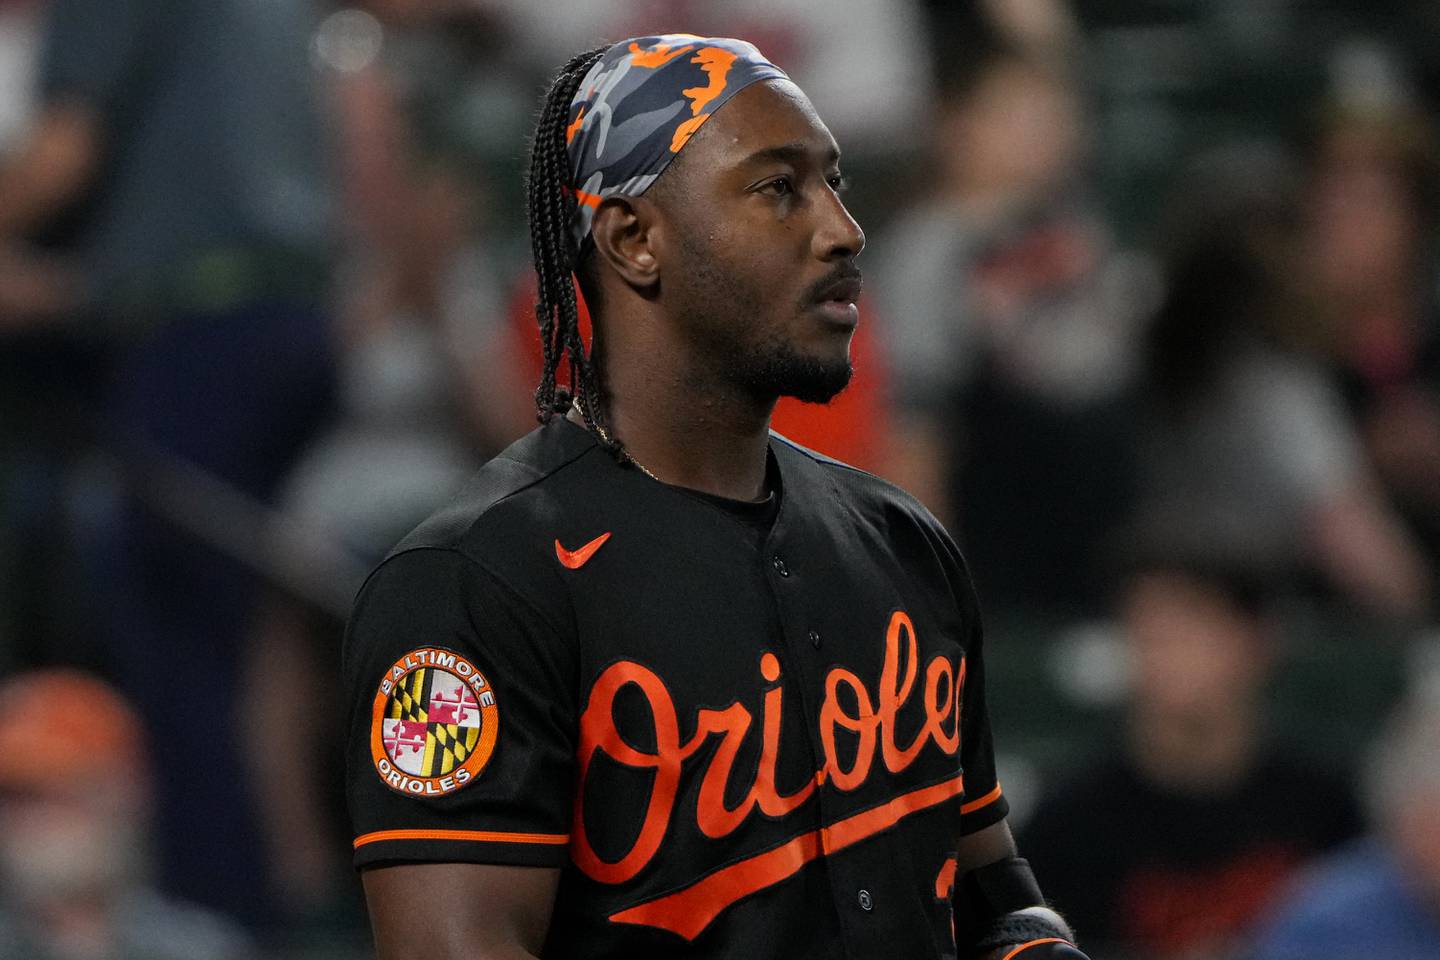 Baltimore Orioles shortstop Jorge Mateo (3) removes his helmet during an inning change during a game against the Tampa Bay Rays in Baltimore on Monday, May 8. The Rays and Orioles played the first game of a series on Monday.